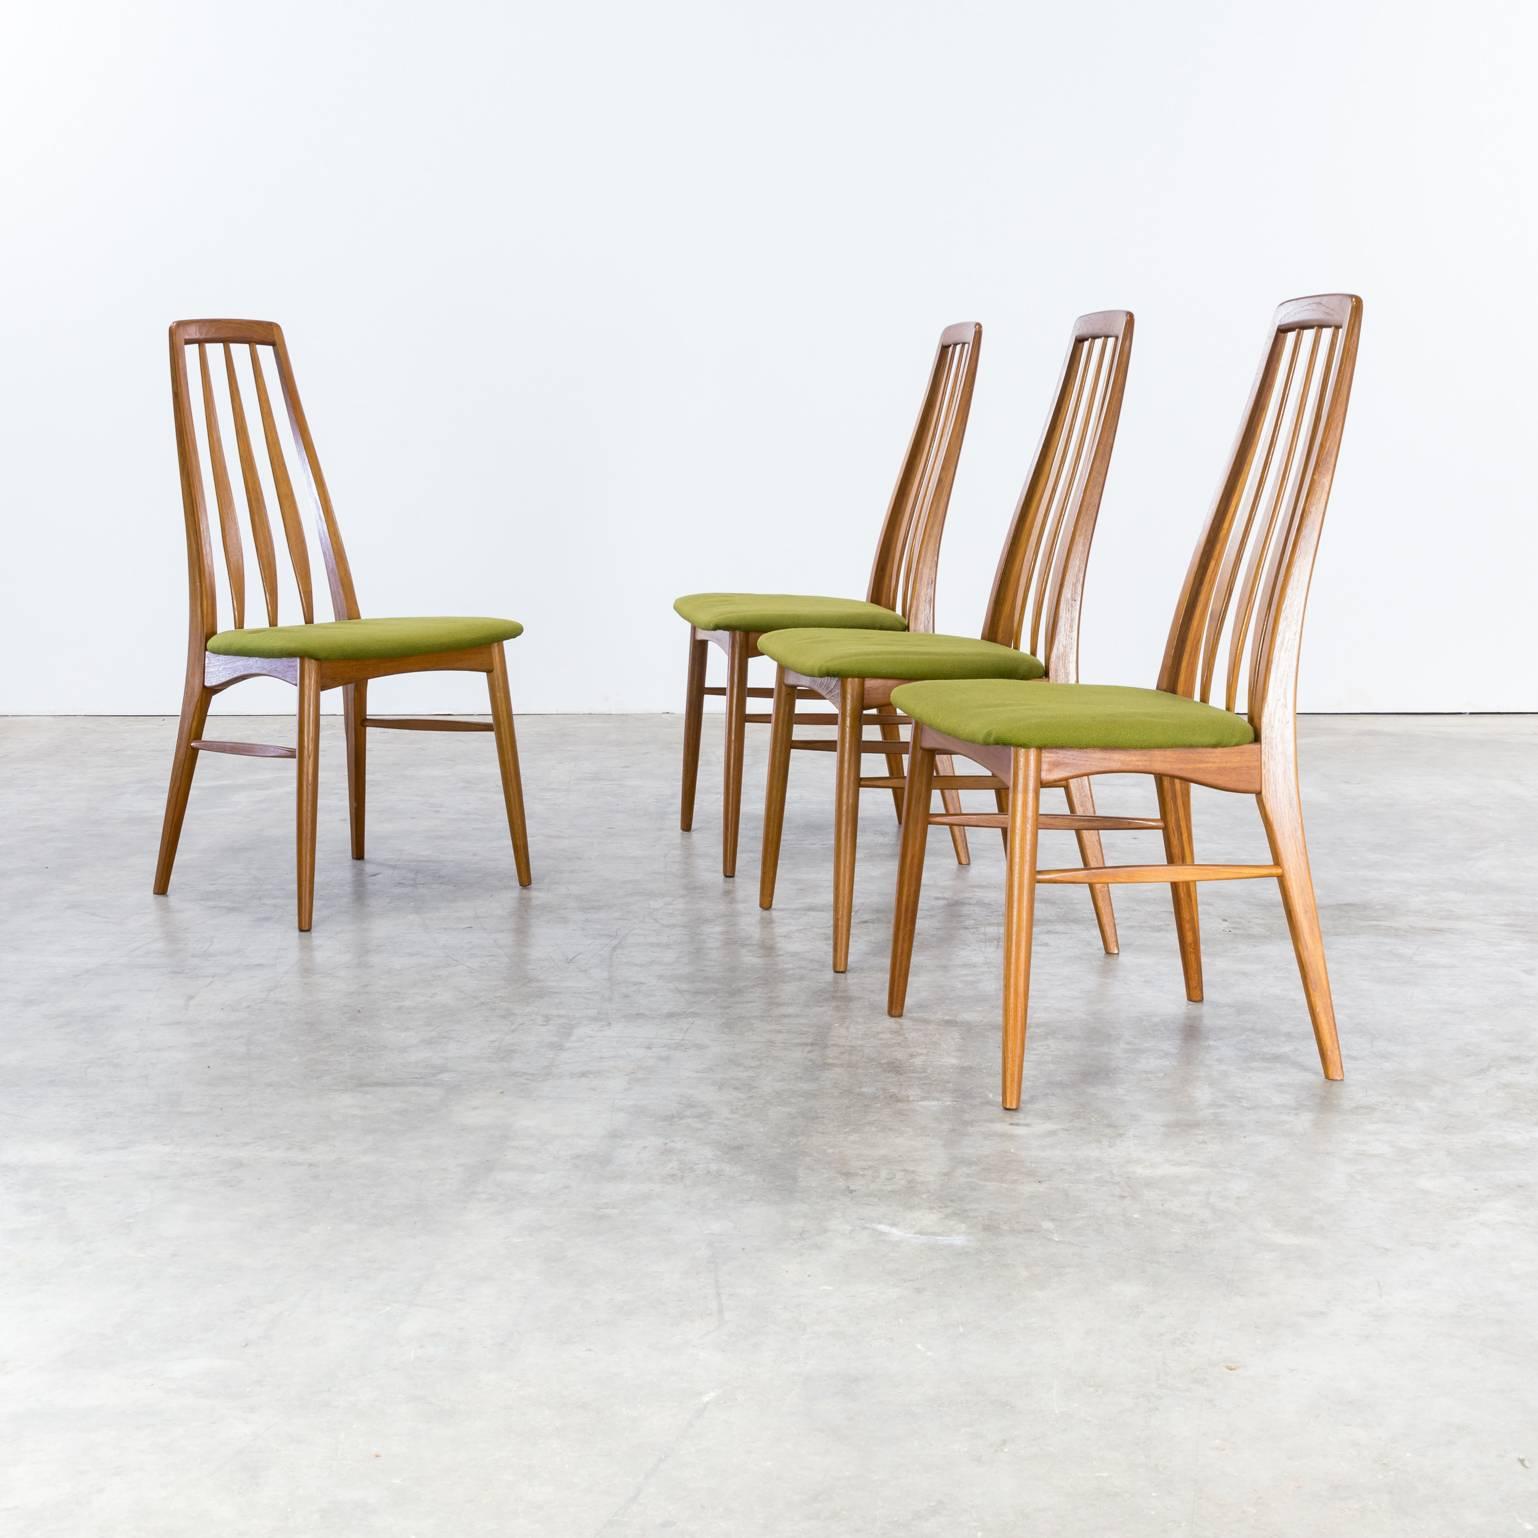 1970s Niels Koefoed ‘eva’ dining chairs for Koefoed Hornslet, set of four. Optional: upholstery if wished for is possible in any keymar fabric at 380, for four piece.